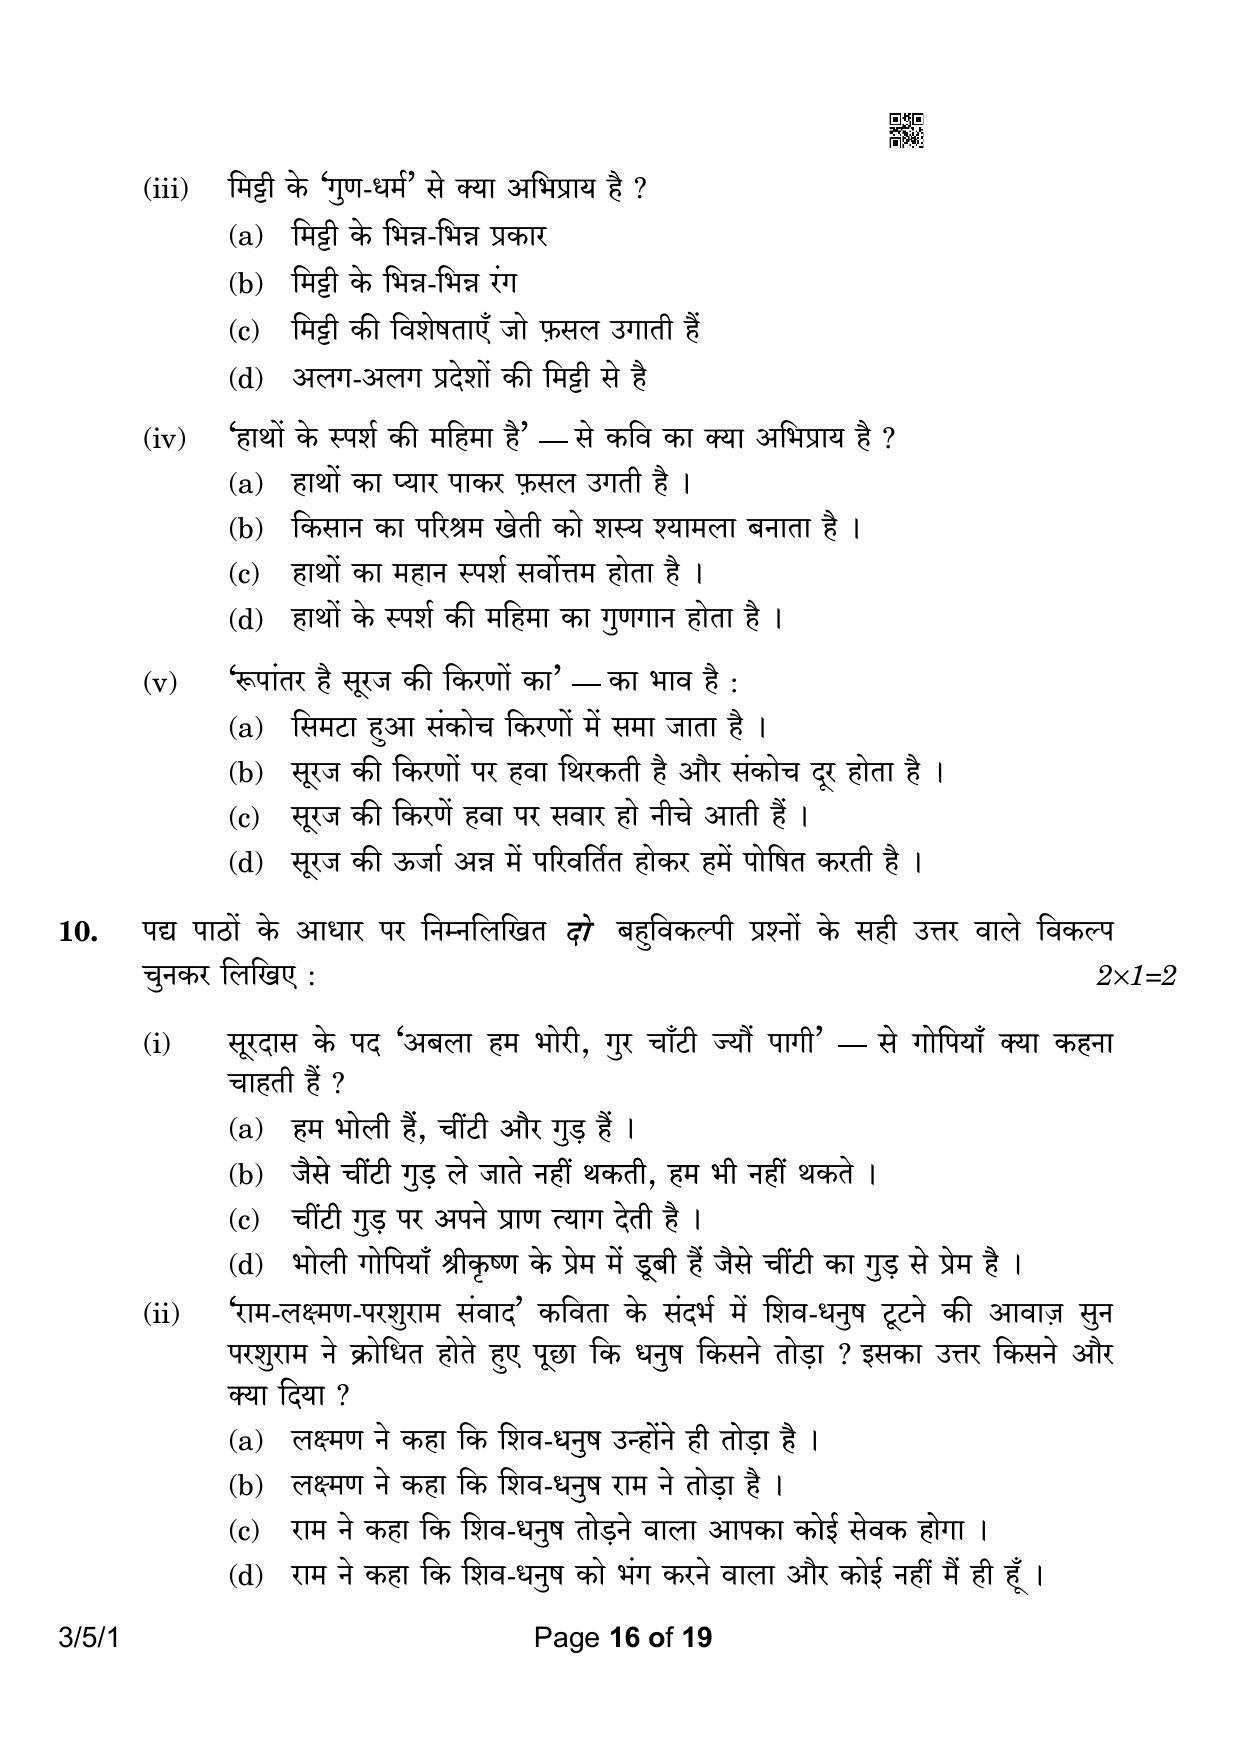 CBSE Class 10 3-5-1 Hindi A 2023 Question Paper - Page 16